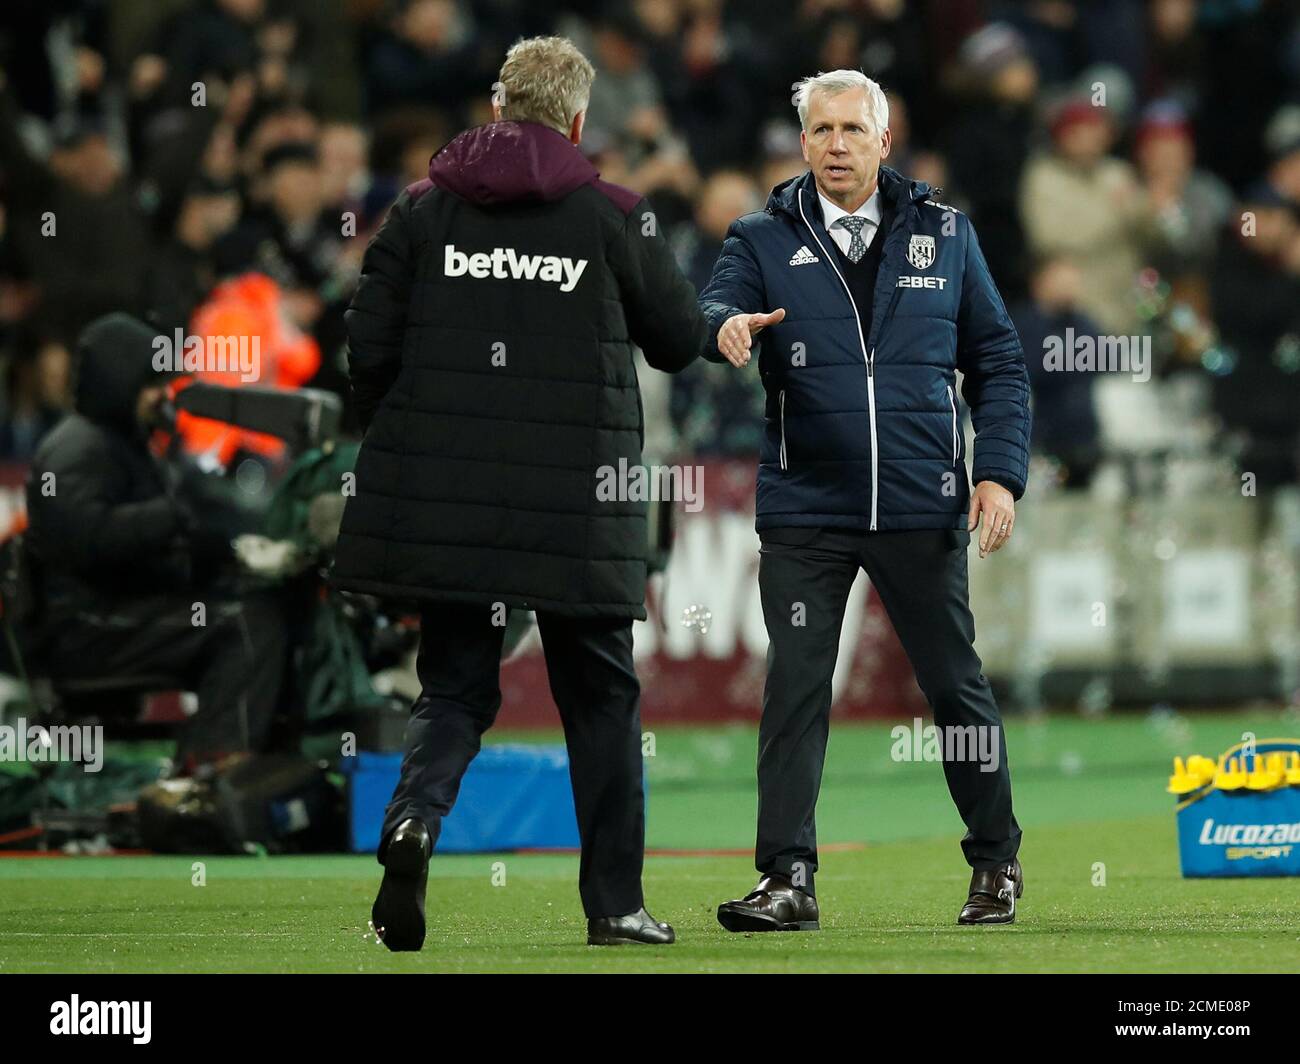 Soccer Football - Premier League - West Ham United vs West Bromwich Albion - London Stadium, London, Britain - January 2, 2018   West Bromwich Albion manager Alan Pardew and West Ham United manager David Moyes after the match    REUTERS/Eddie Keogh    EDITORIAL USE ONLY. No use with unauthorized audio, video, data, fixture lists, club/league logos or 'live' services. Online in-match use limited to 75 images, no video emulation. No use in betting, games or single club/league/player publications.  Please contact your account representative for further details. Stock Photo